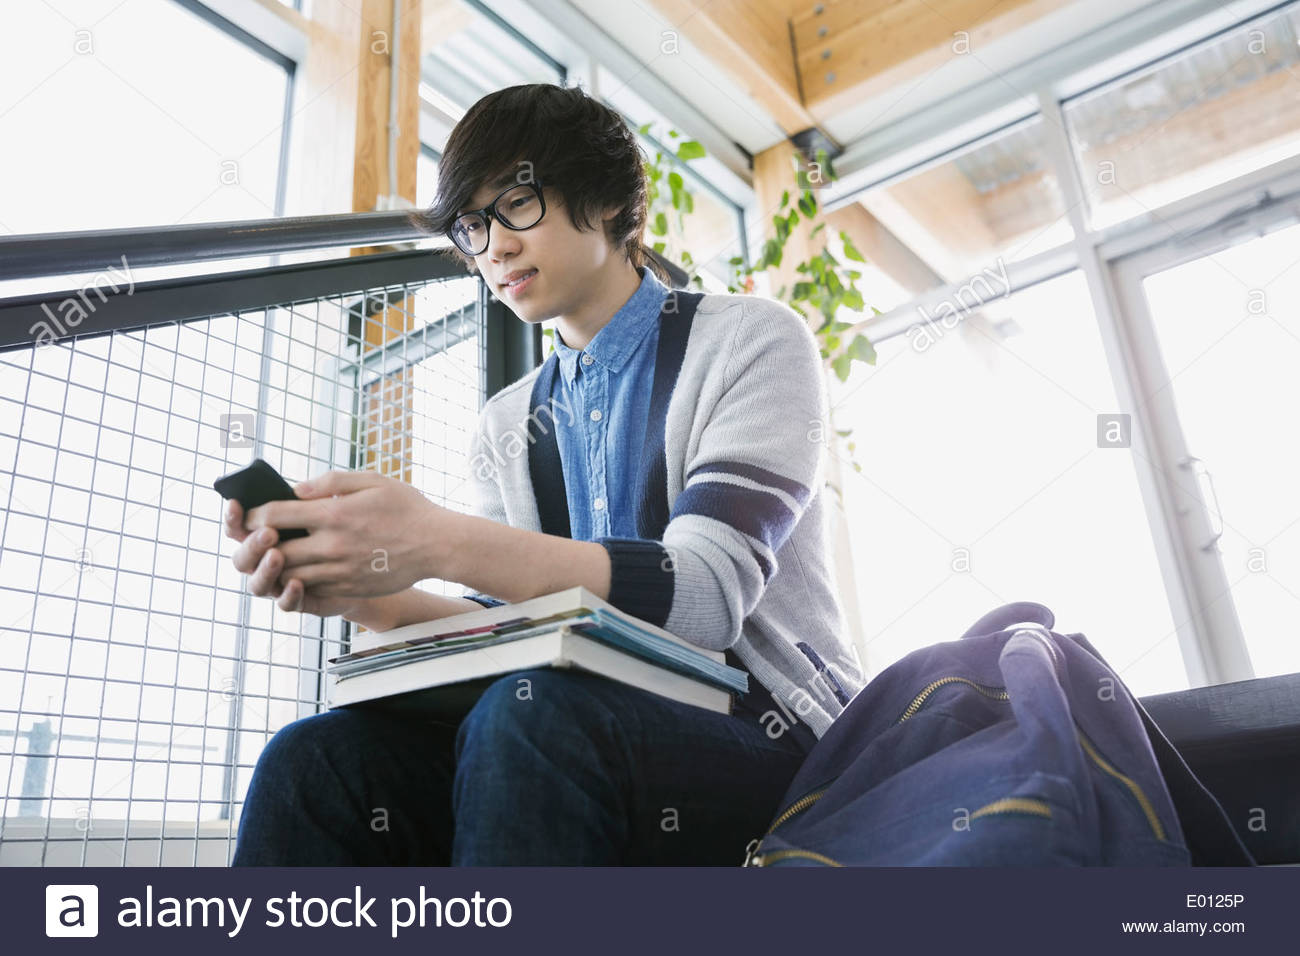 High school boy text messaging with cell phone Stock Photo